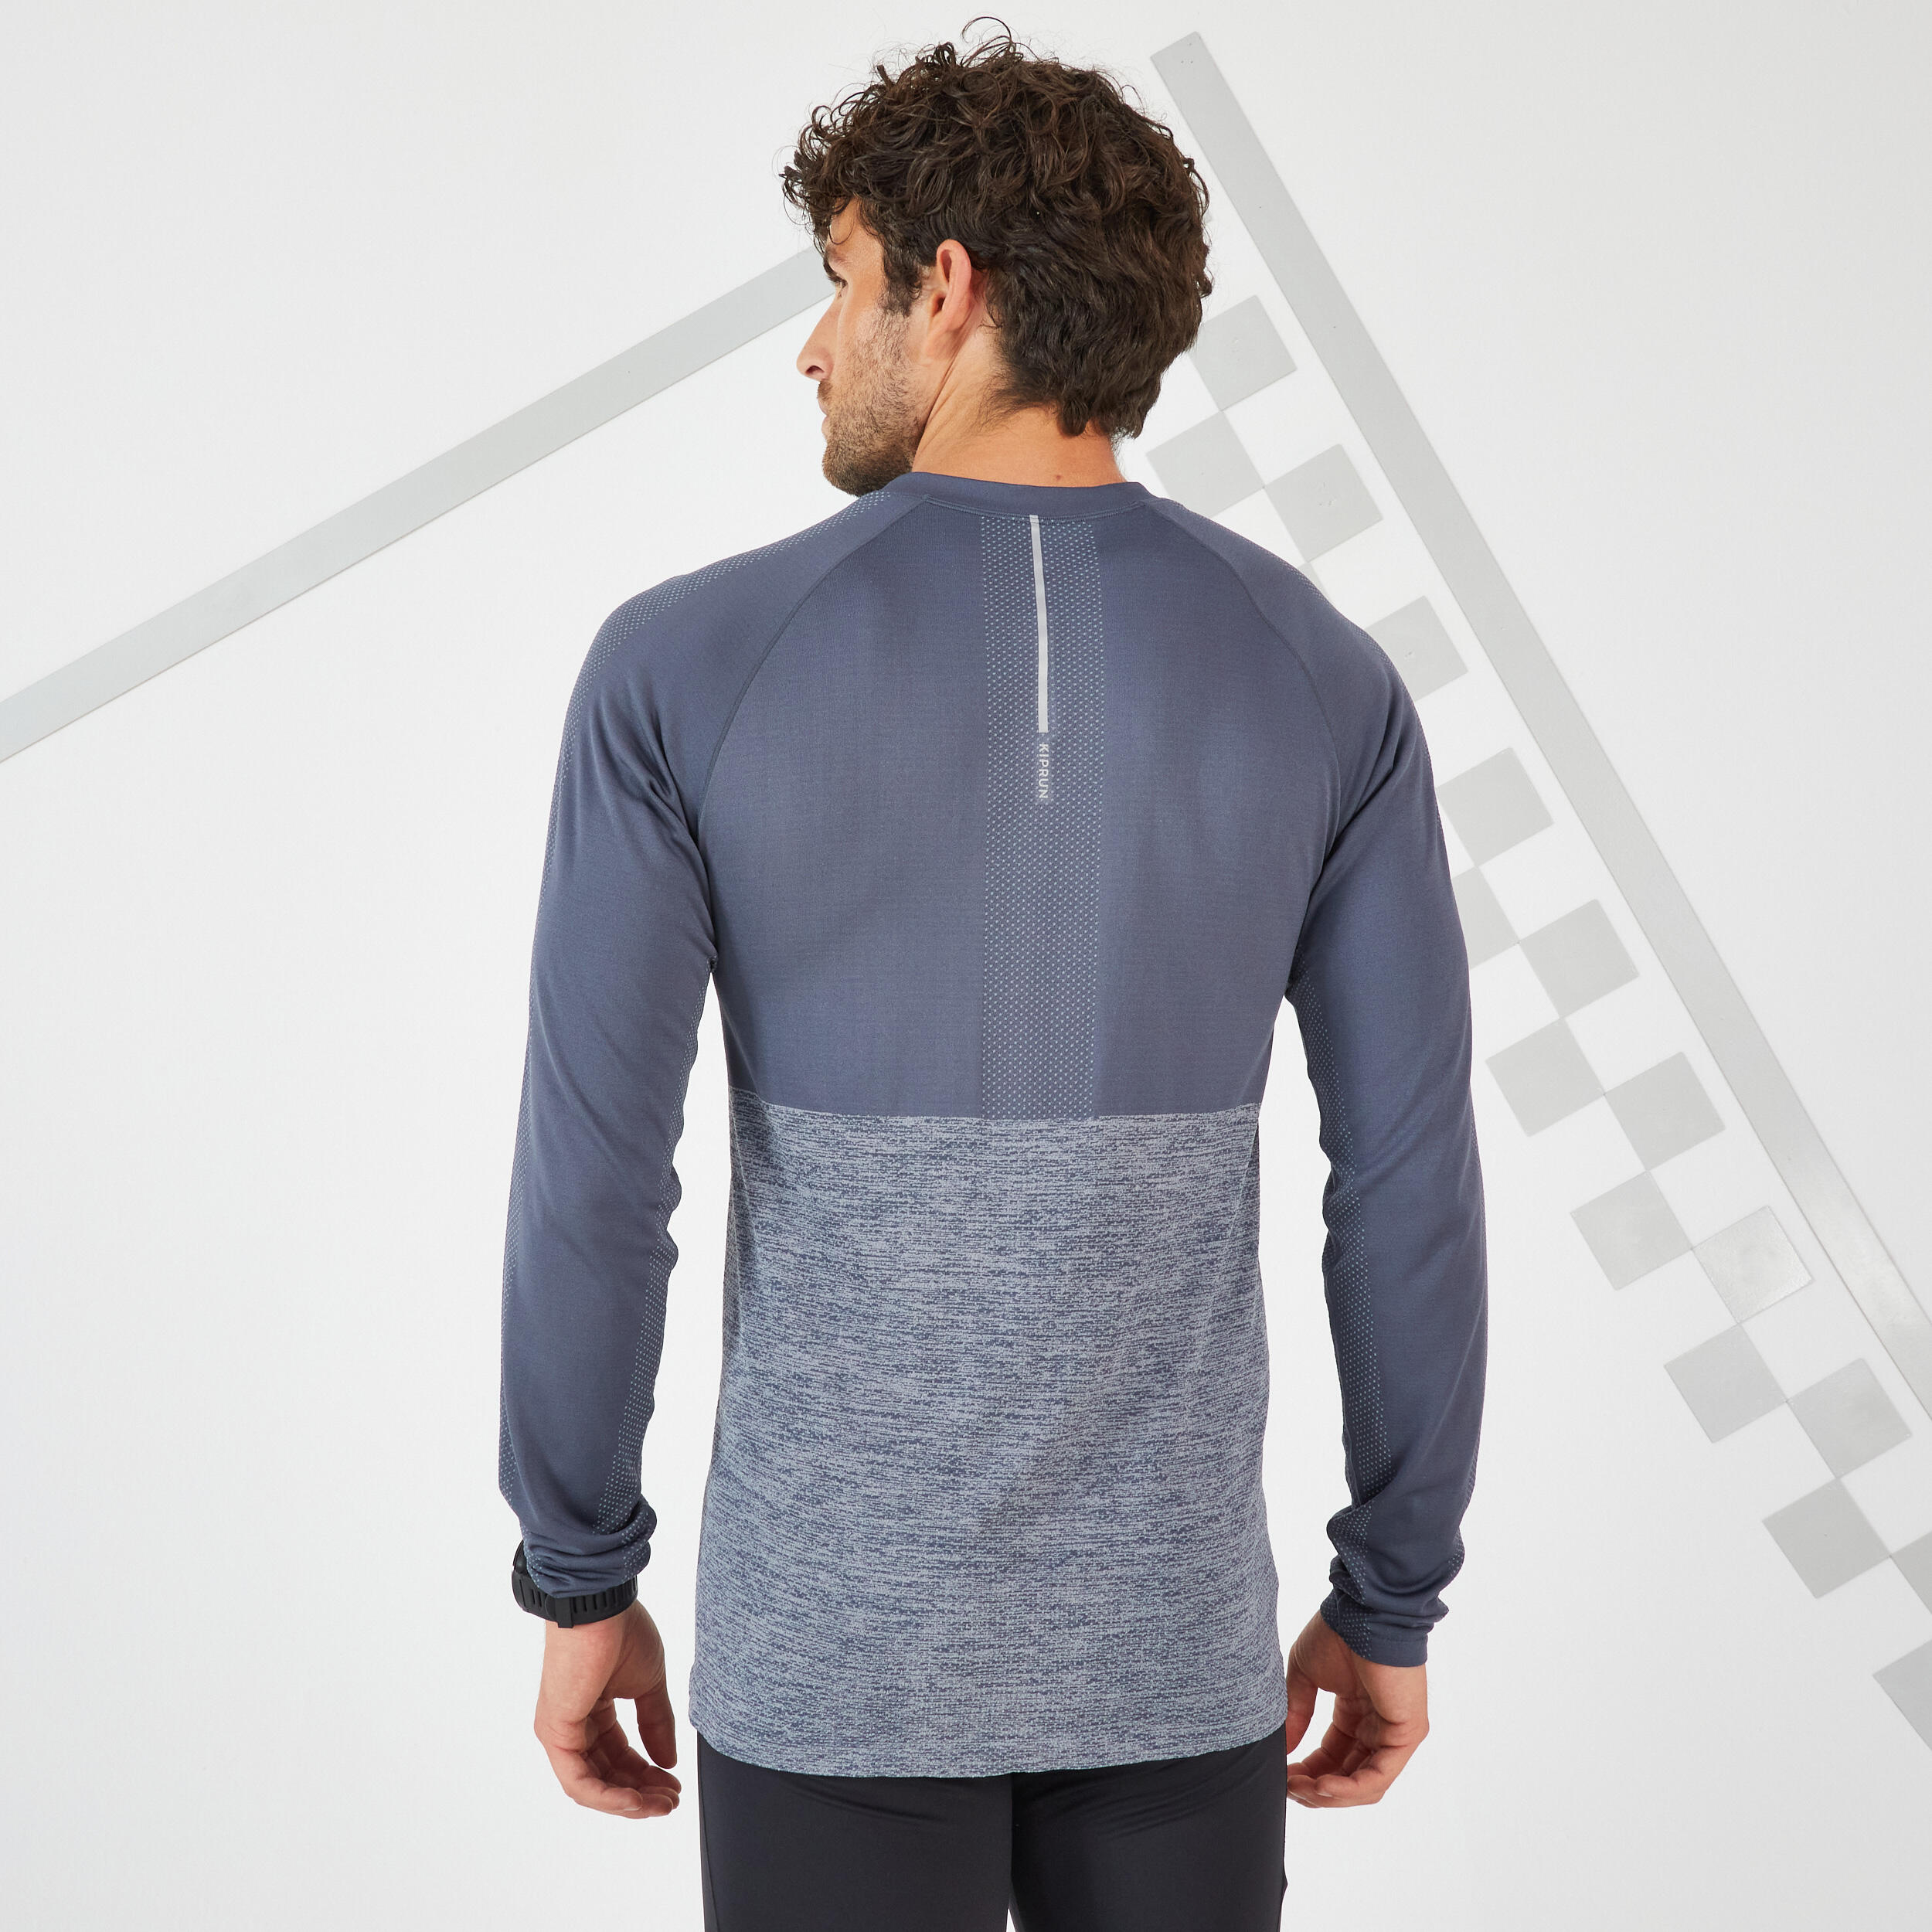 CARE MEN'S BREATHABLE LONG-SLEEVED RUNNING T-SHIRT - GREY LIMITED EDITION 3/9